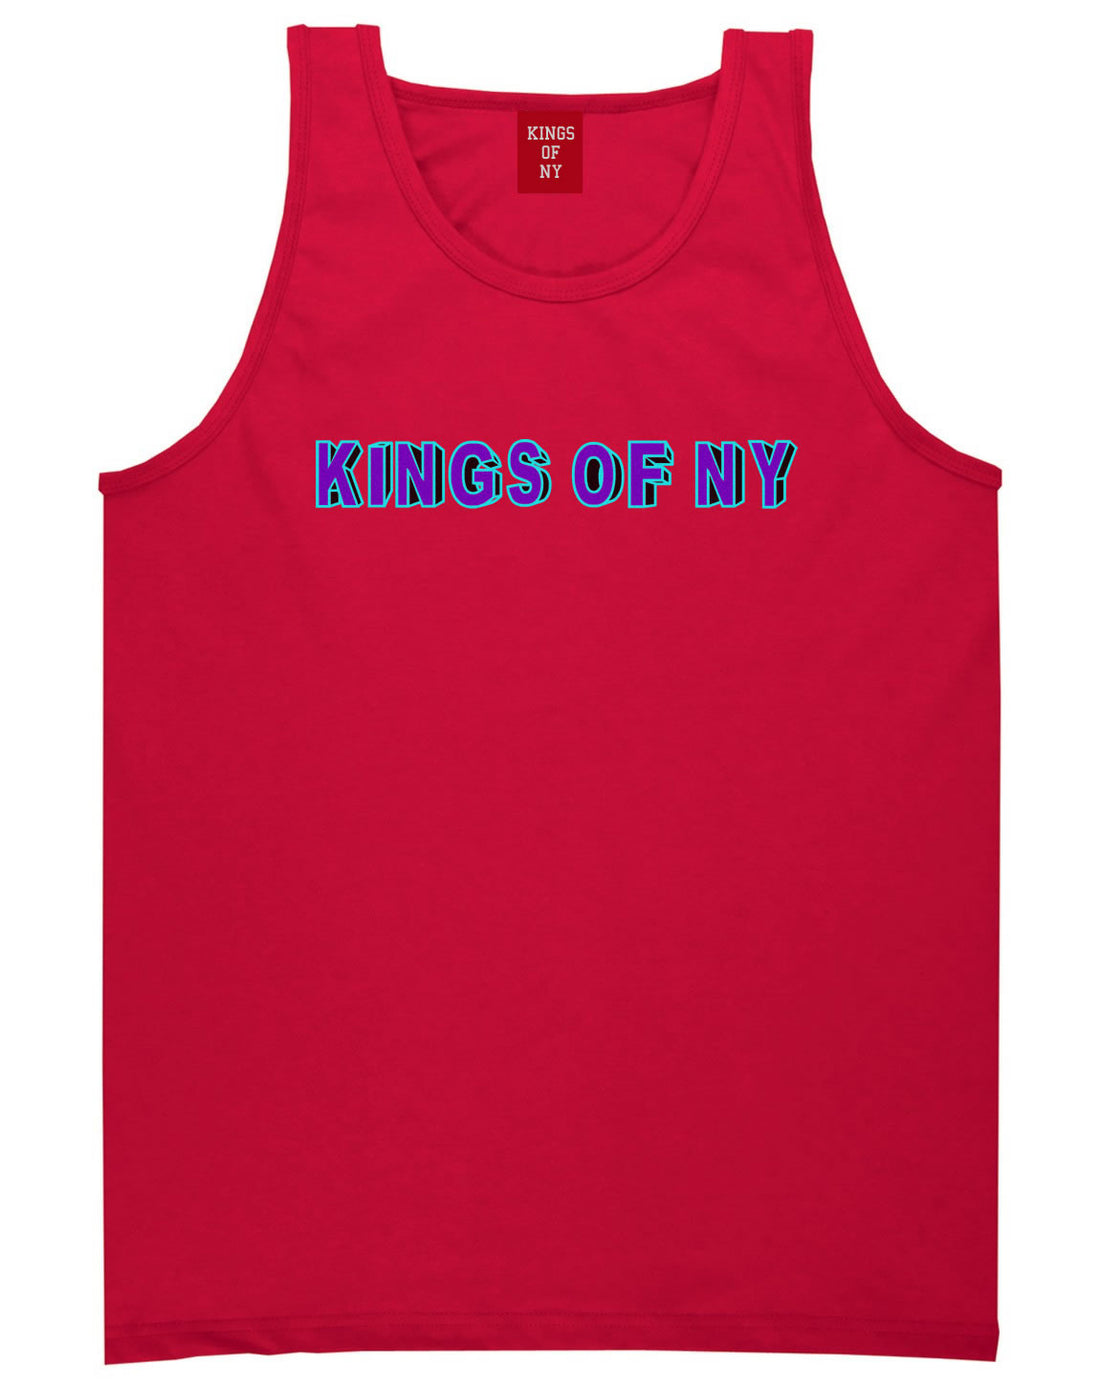 Bright Block Letters Tank Top in Red by Kings Of NY